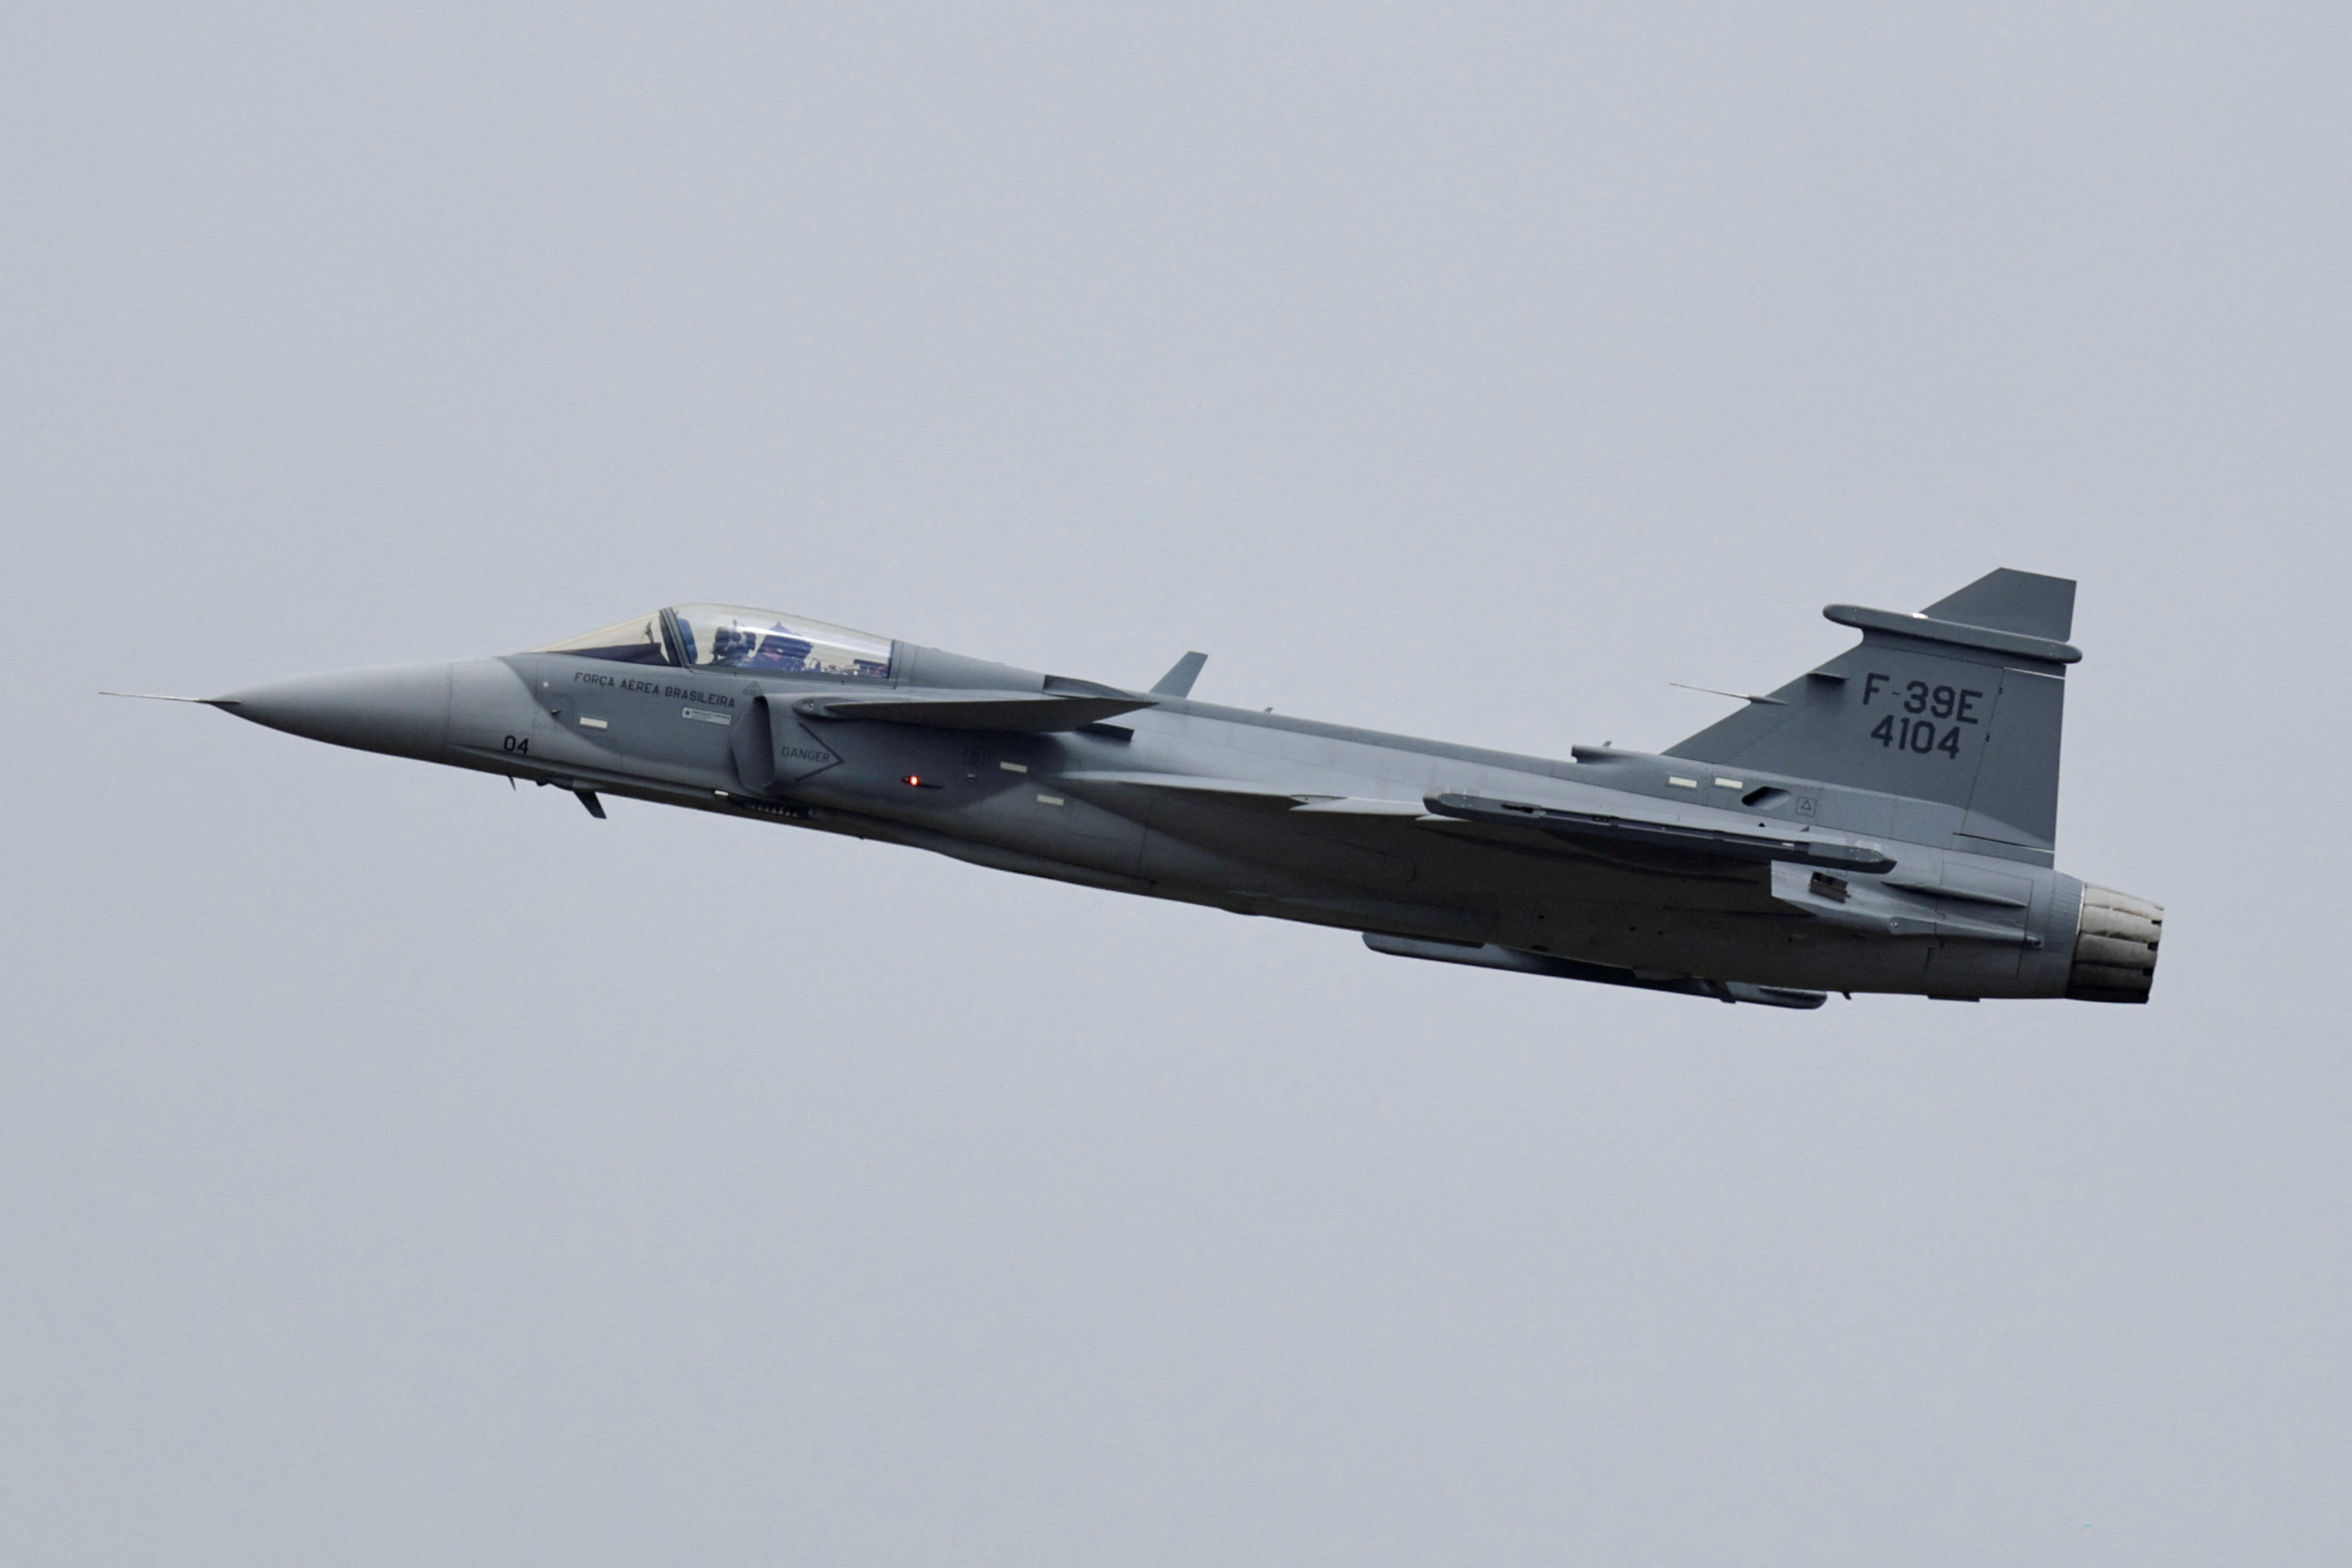 Ceremony to mark the beginning of operational activities of the F-39 Gripen fighters